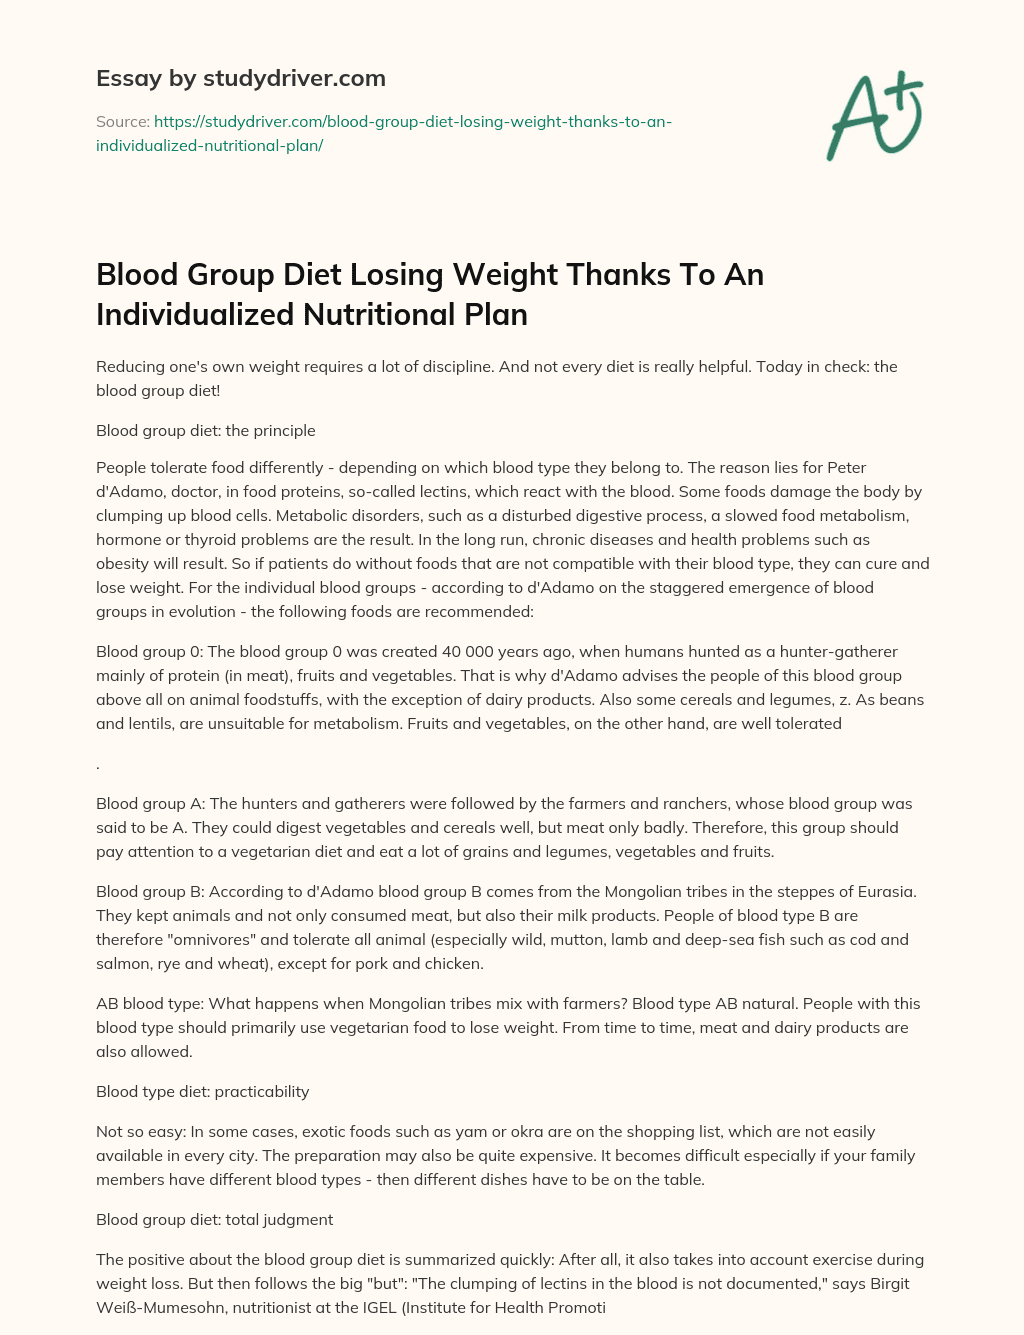 Blood Group Diet Losing Weight Thanks to an Individualized Nutritional Plan essay